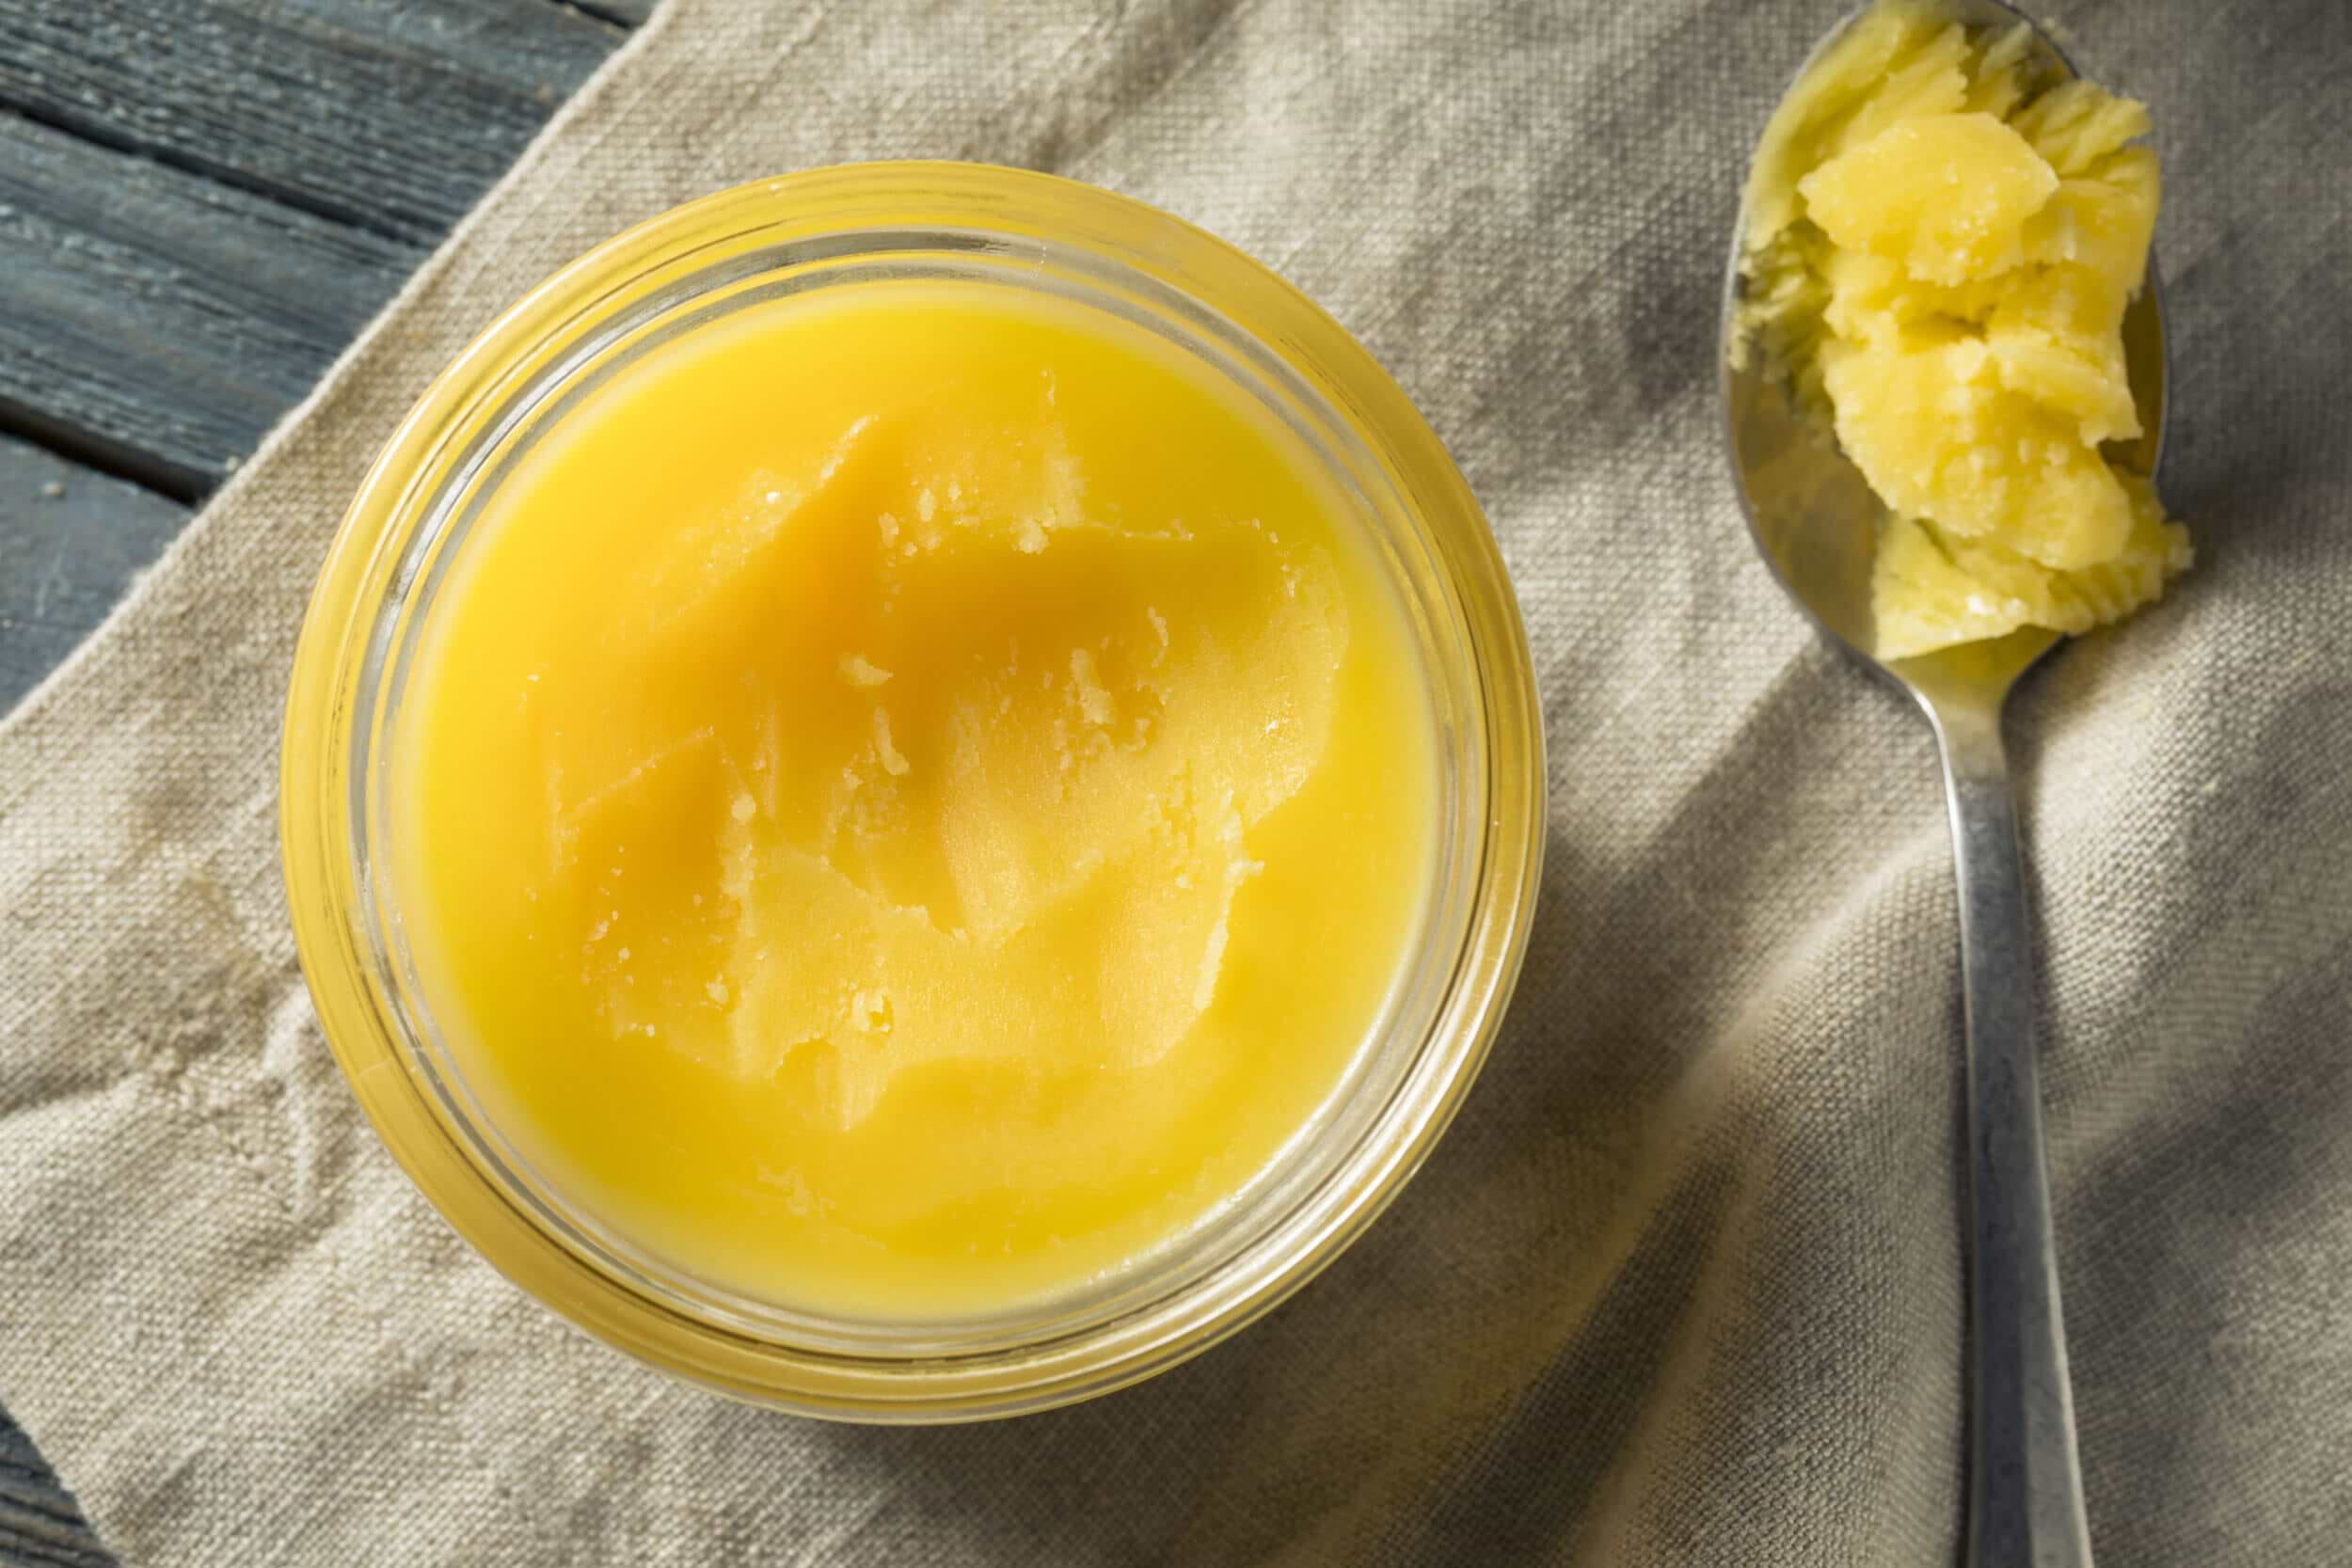 How to Make Ghee from Butter - Oh, The Things We'll Make!